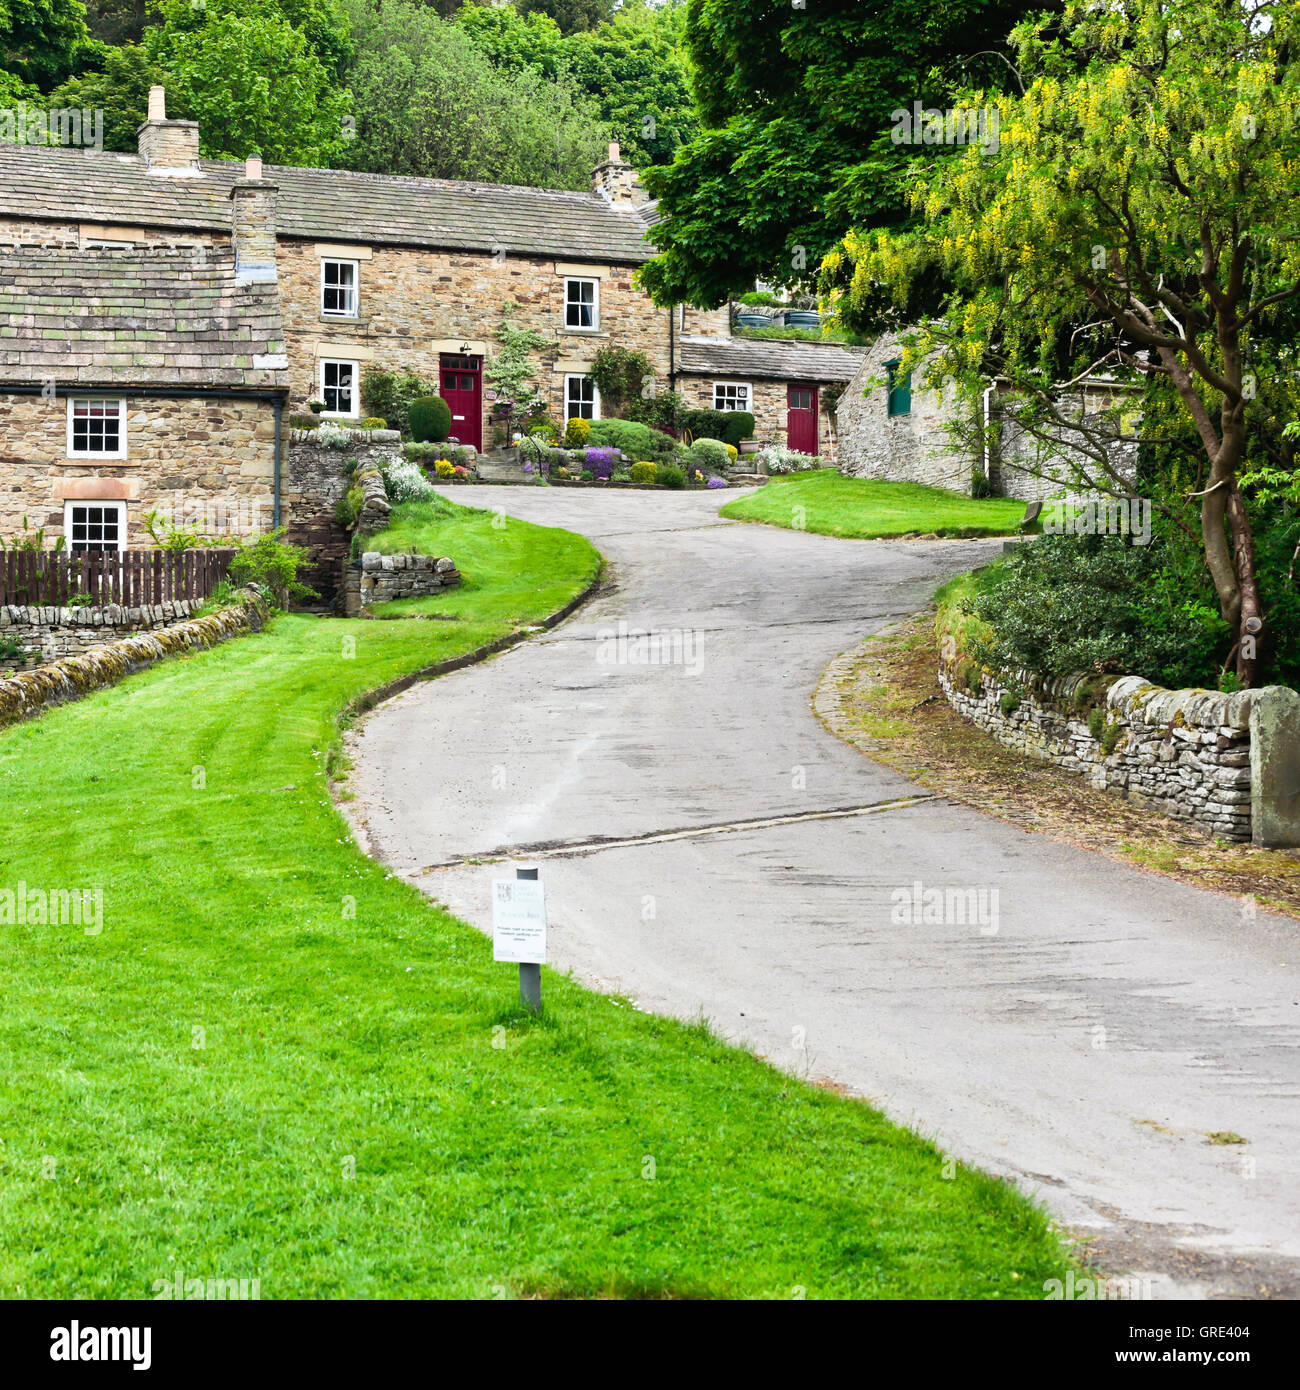 Blanchland cottages Foto Stock